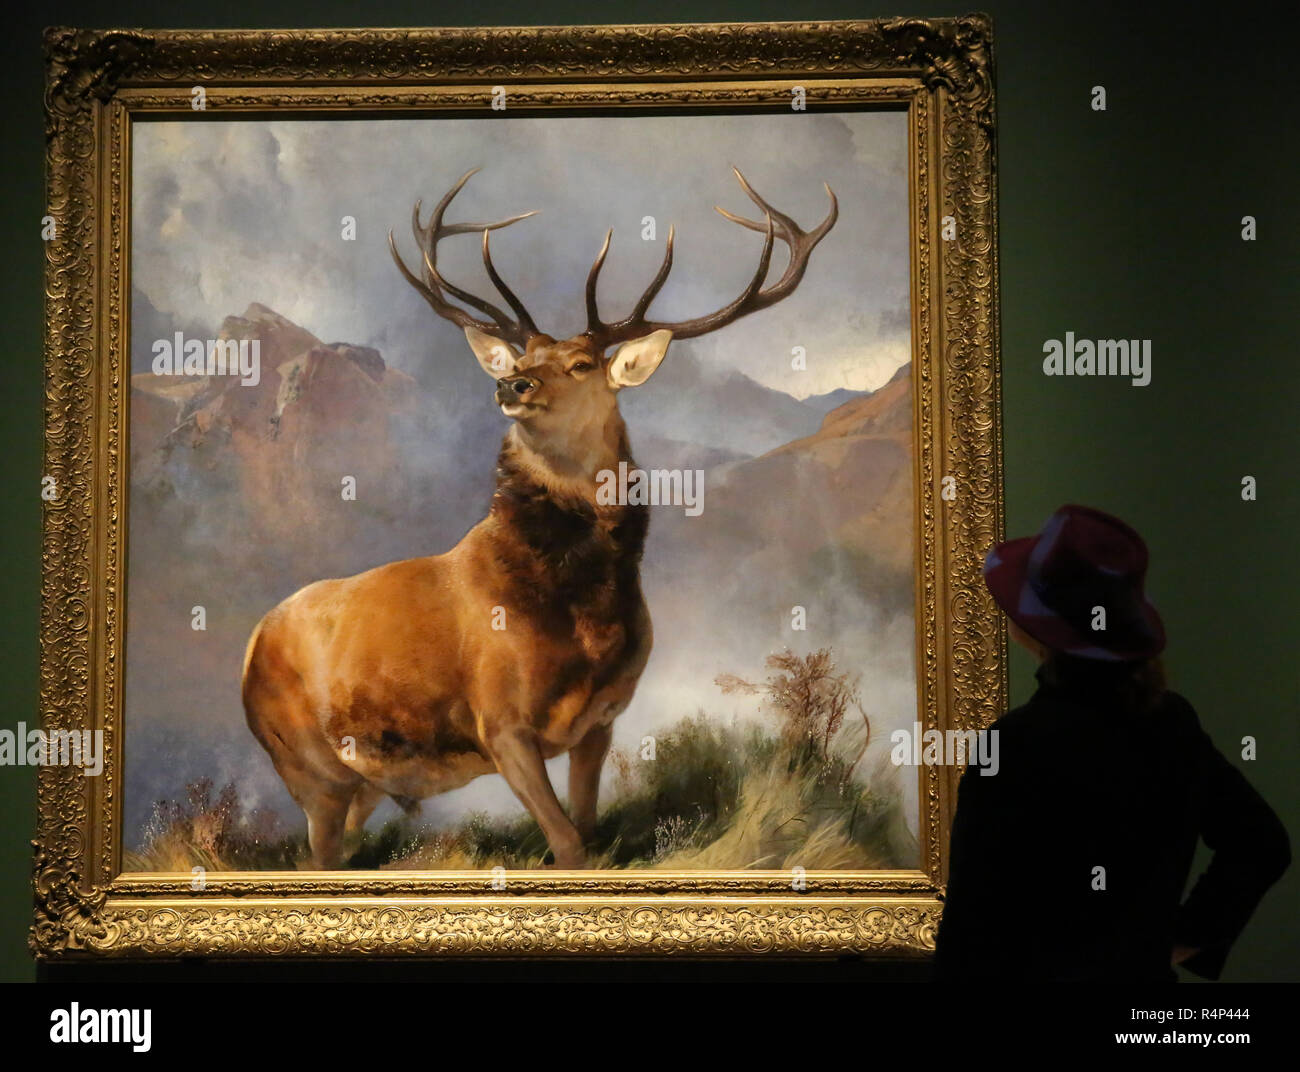 National Gallery. London, UK. 28 Nov 2018 - A woman looks at an oil-on-canvas painting of a red deer stag completed in 1851 by the English painter Sir Edwin Landseer'.     The Monarch of the Glen (about 1985) is one of the most famous British pictures of the nineteenth century; for many people it encapsulates the grandeur and majesty of ScotlandÕs highlands and wildlife.    Credit: Dinendra Haria/Alamy Live News Stock Photo